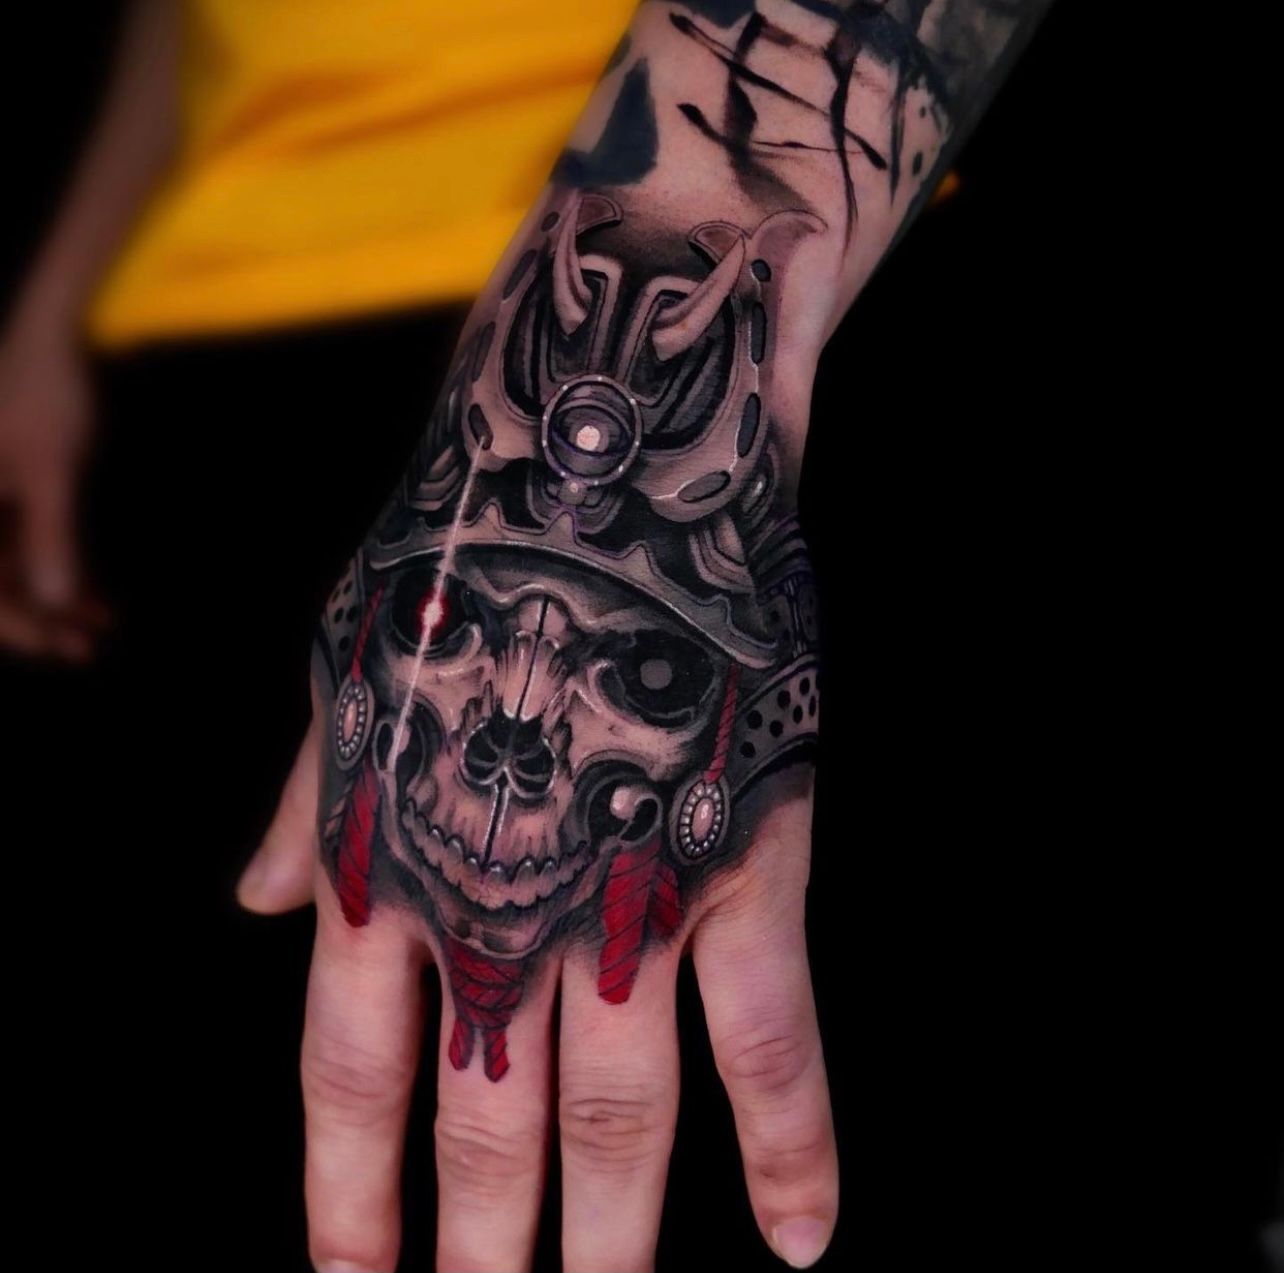 11 Japanese Skulls Tattoo Ideas That Will Blow Your Mind  alexie